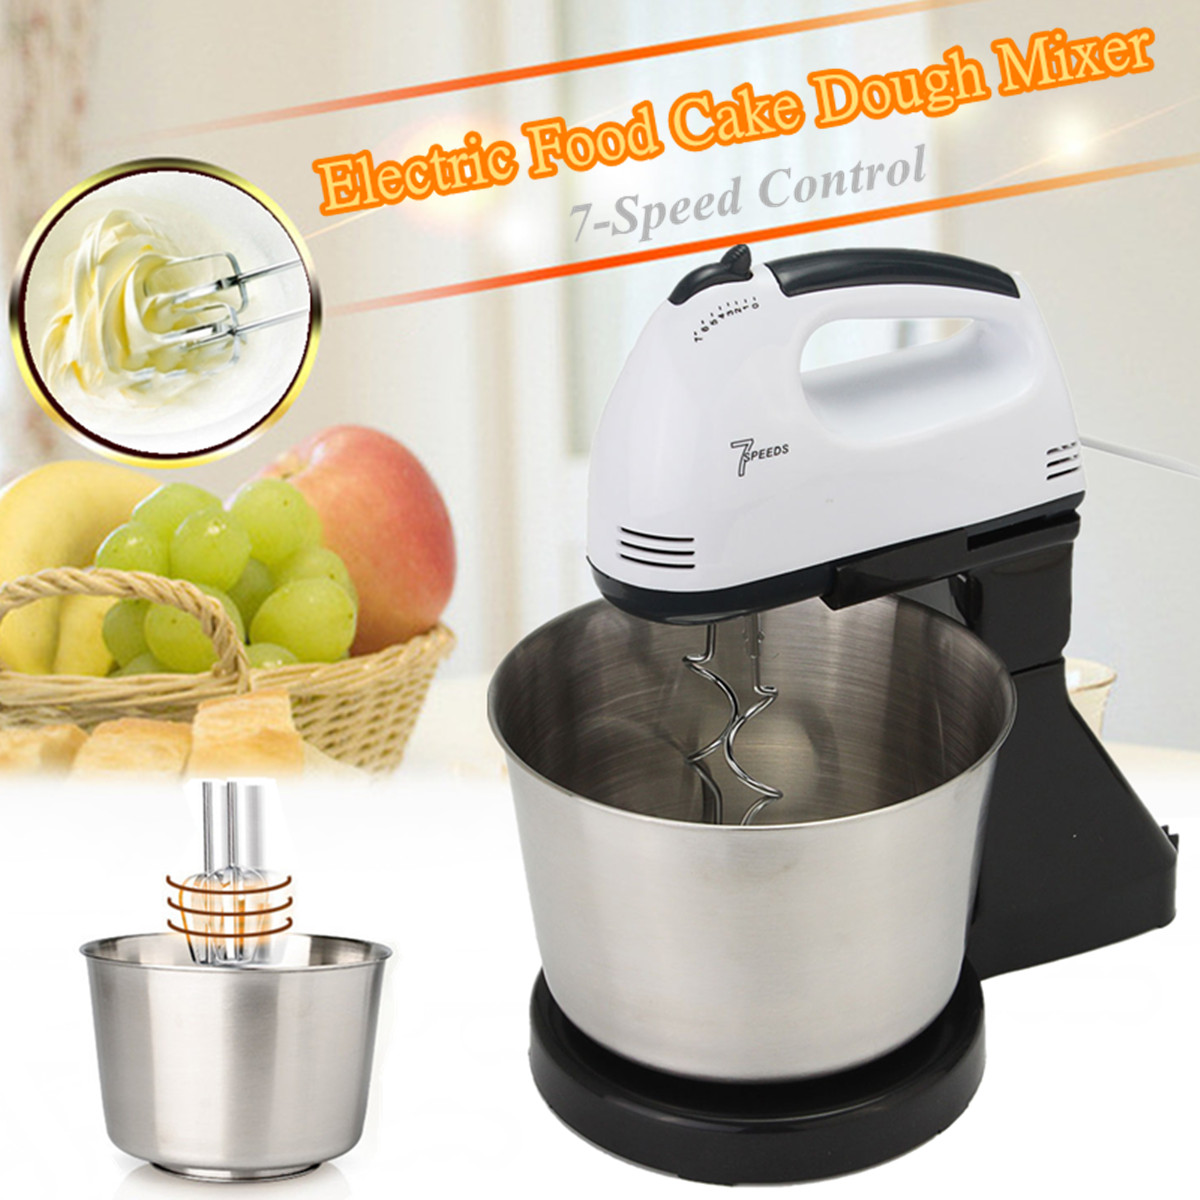 7 Speed Electric Egg Beater Dough Cakes Bread Egg Stand Mixer + Hand Blender + Bowl Food Mixer Kitchen Accessories Egg Tools 40